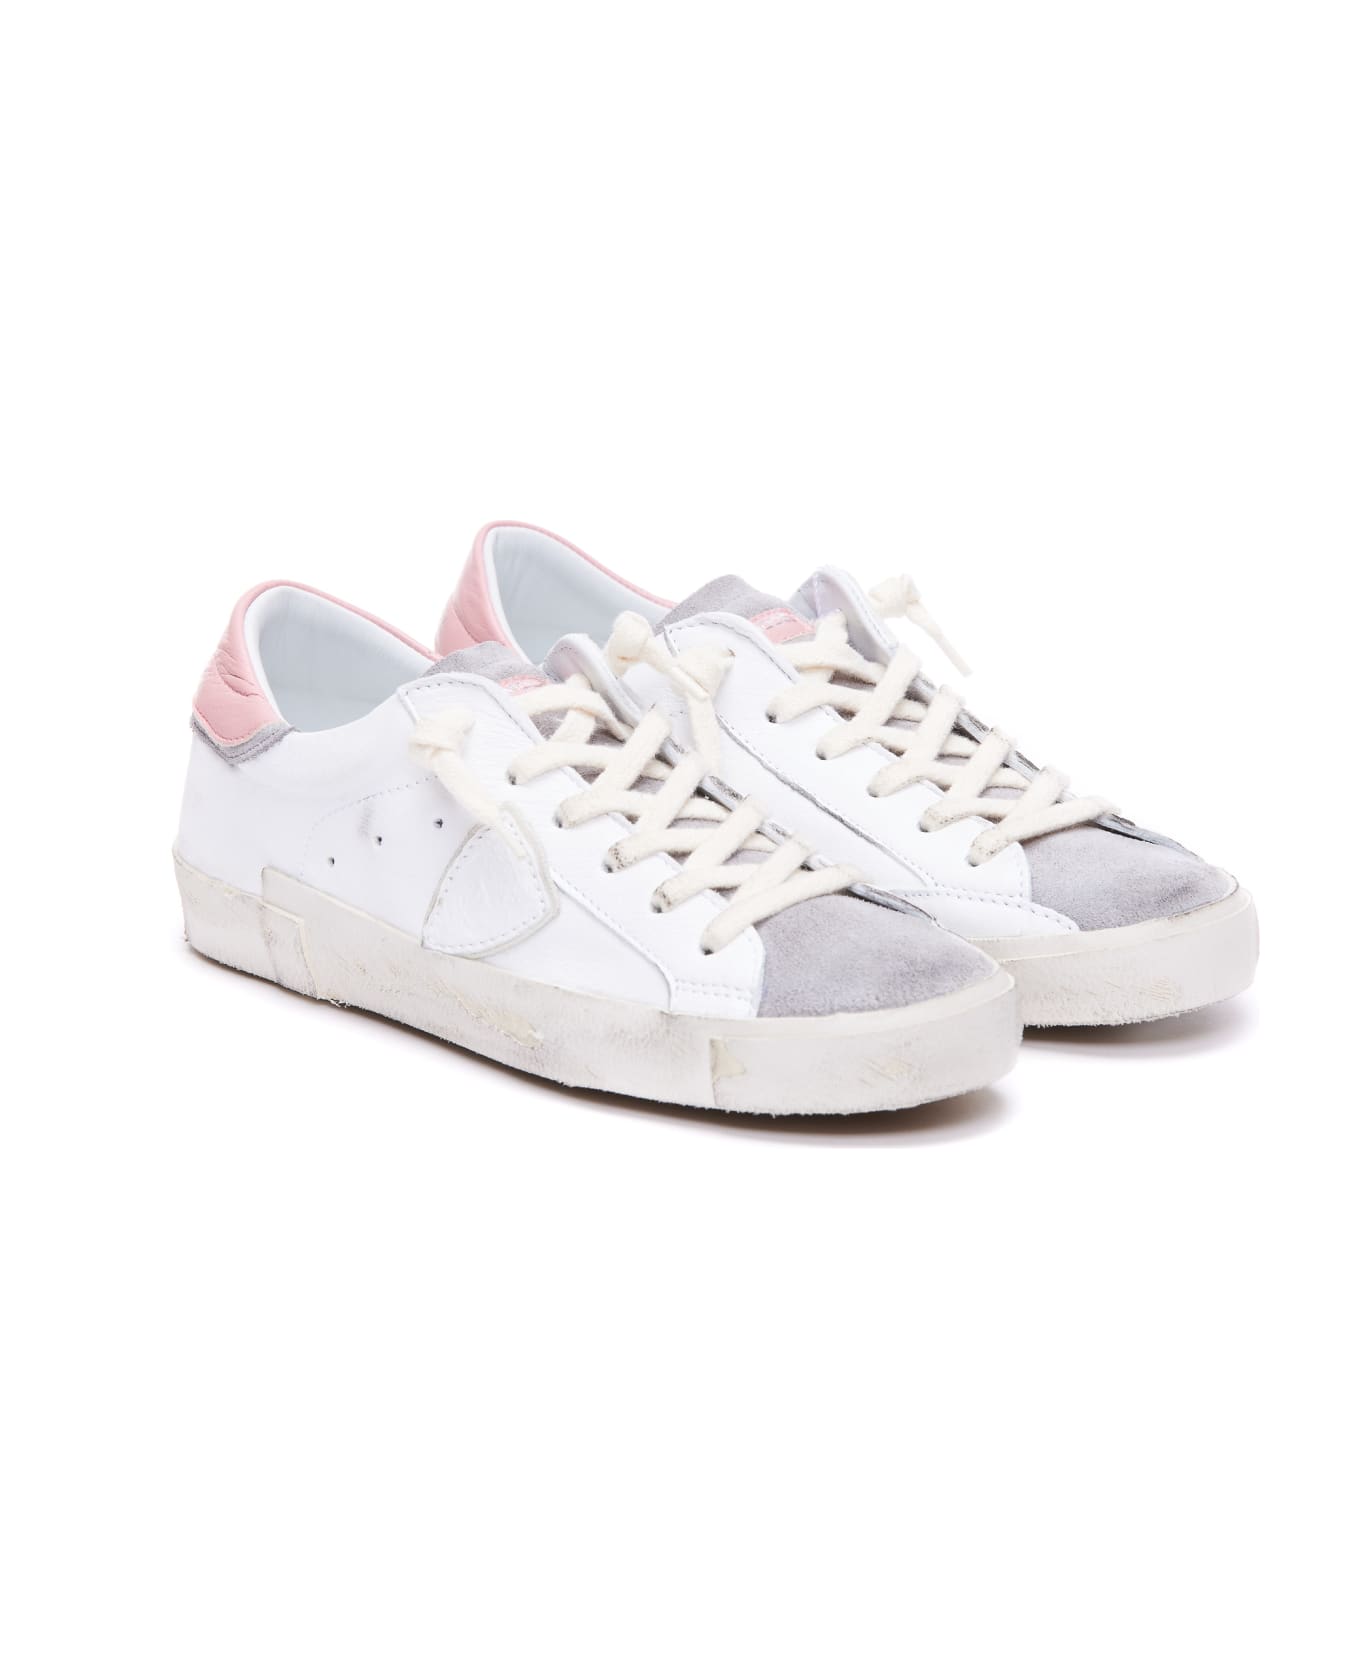 Philippe Model Prsx Low Sneakers - Vintage Mixage Blanc Anthracit スニーカー